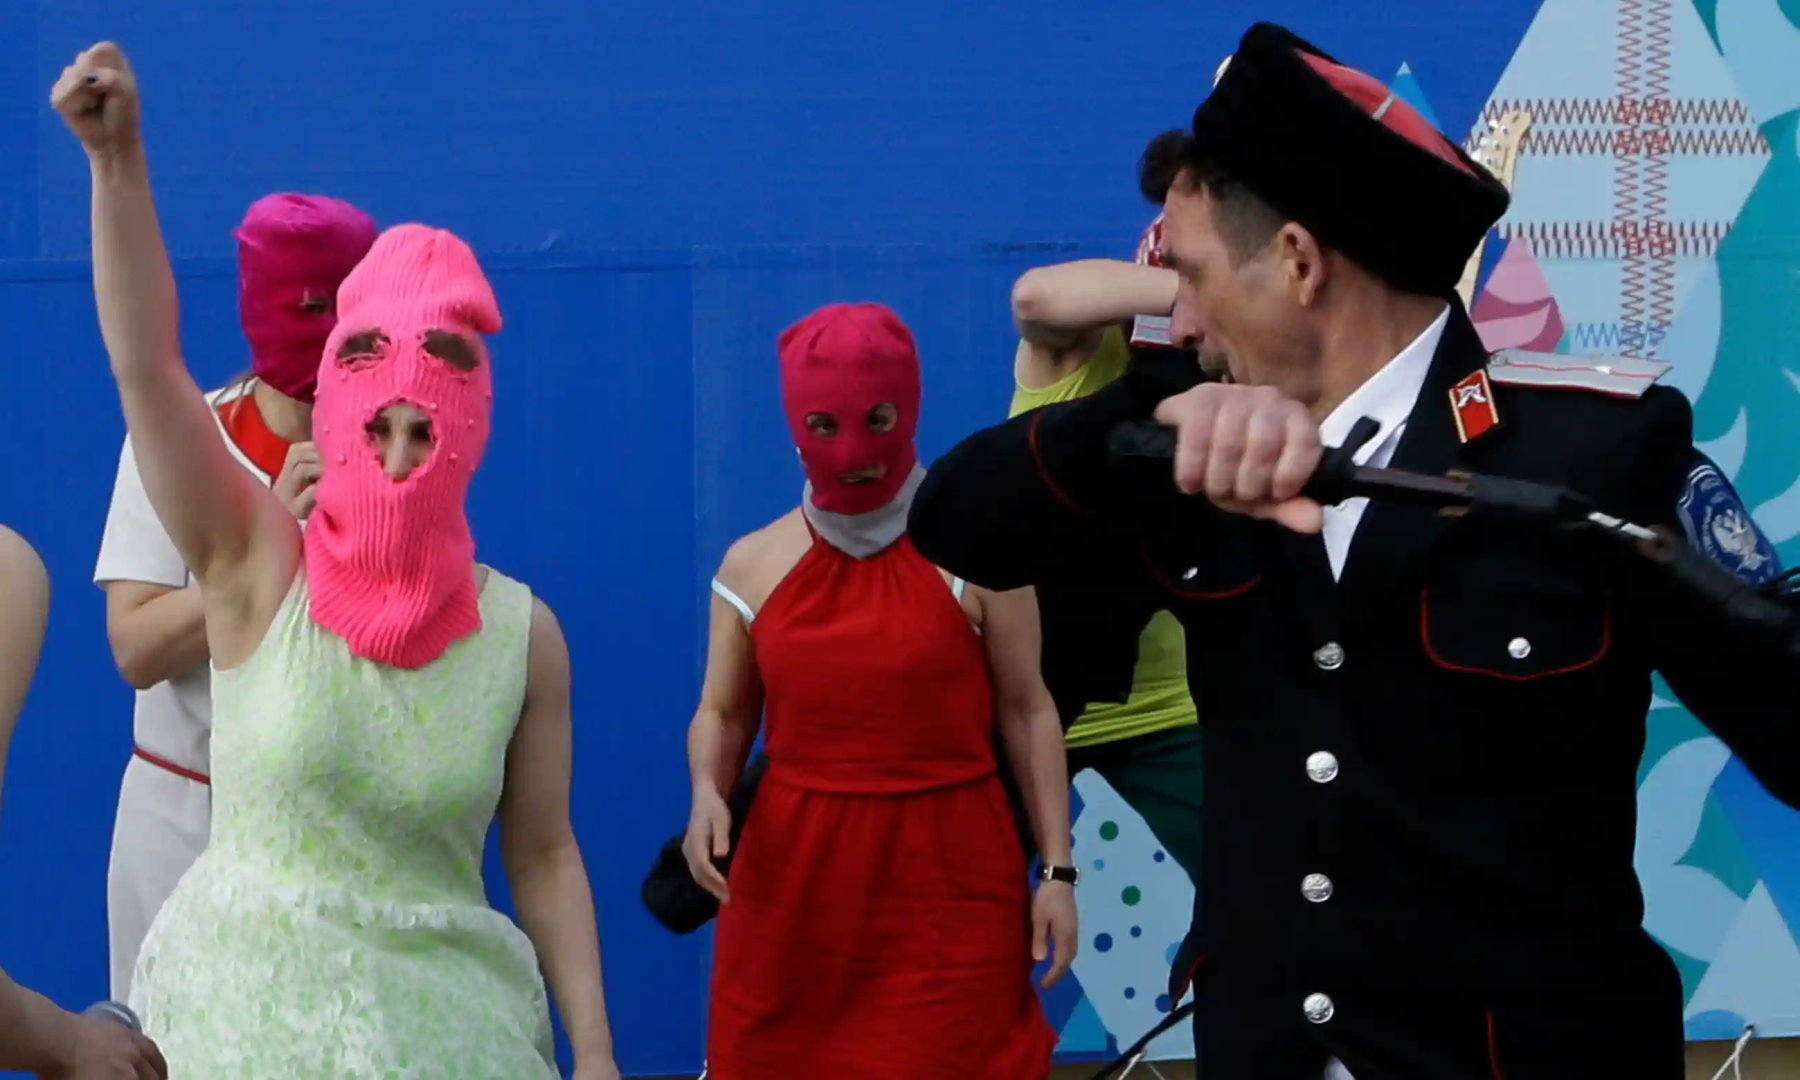 A performance by the band Pussy Riot: 3 women in stocking caps being attacked by a policeman